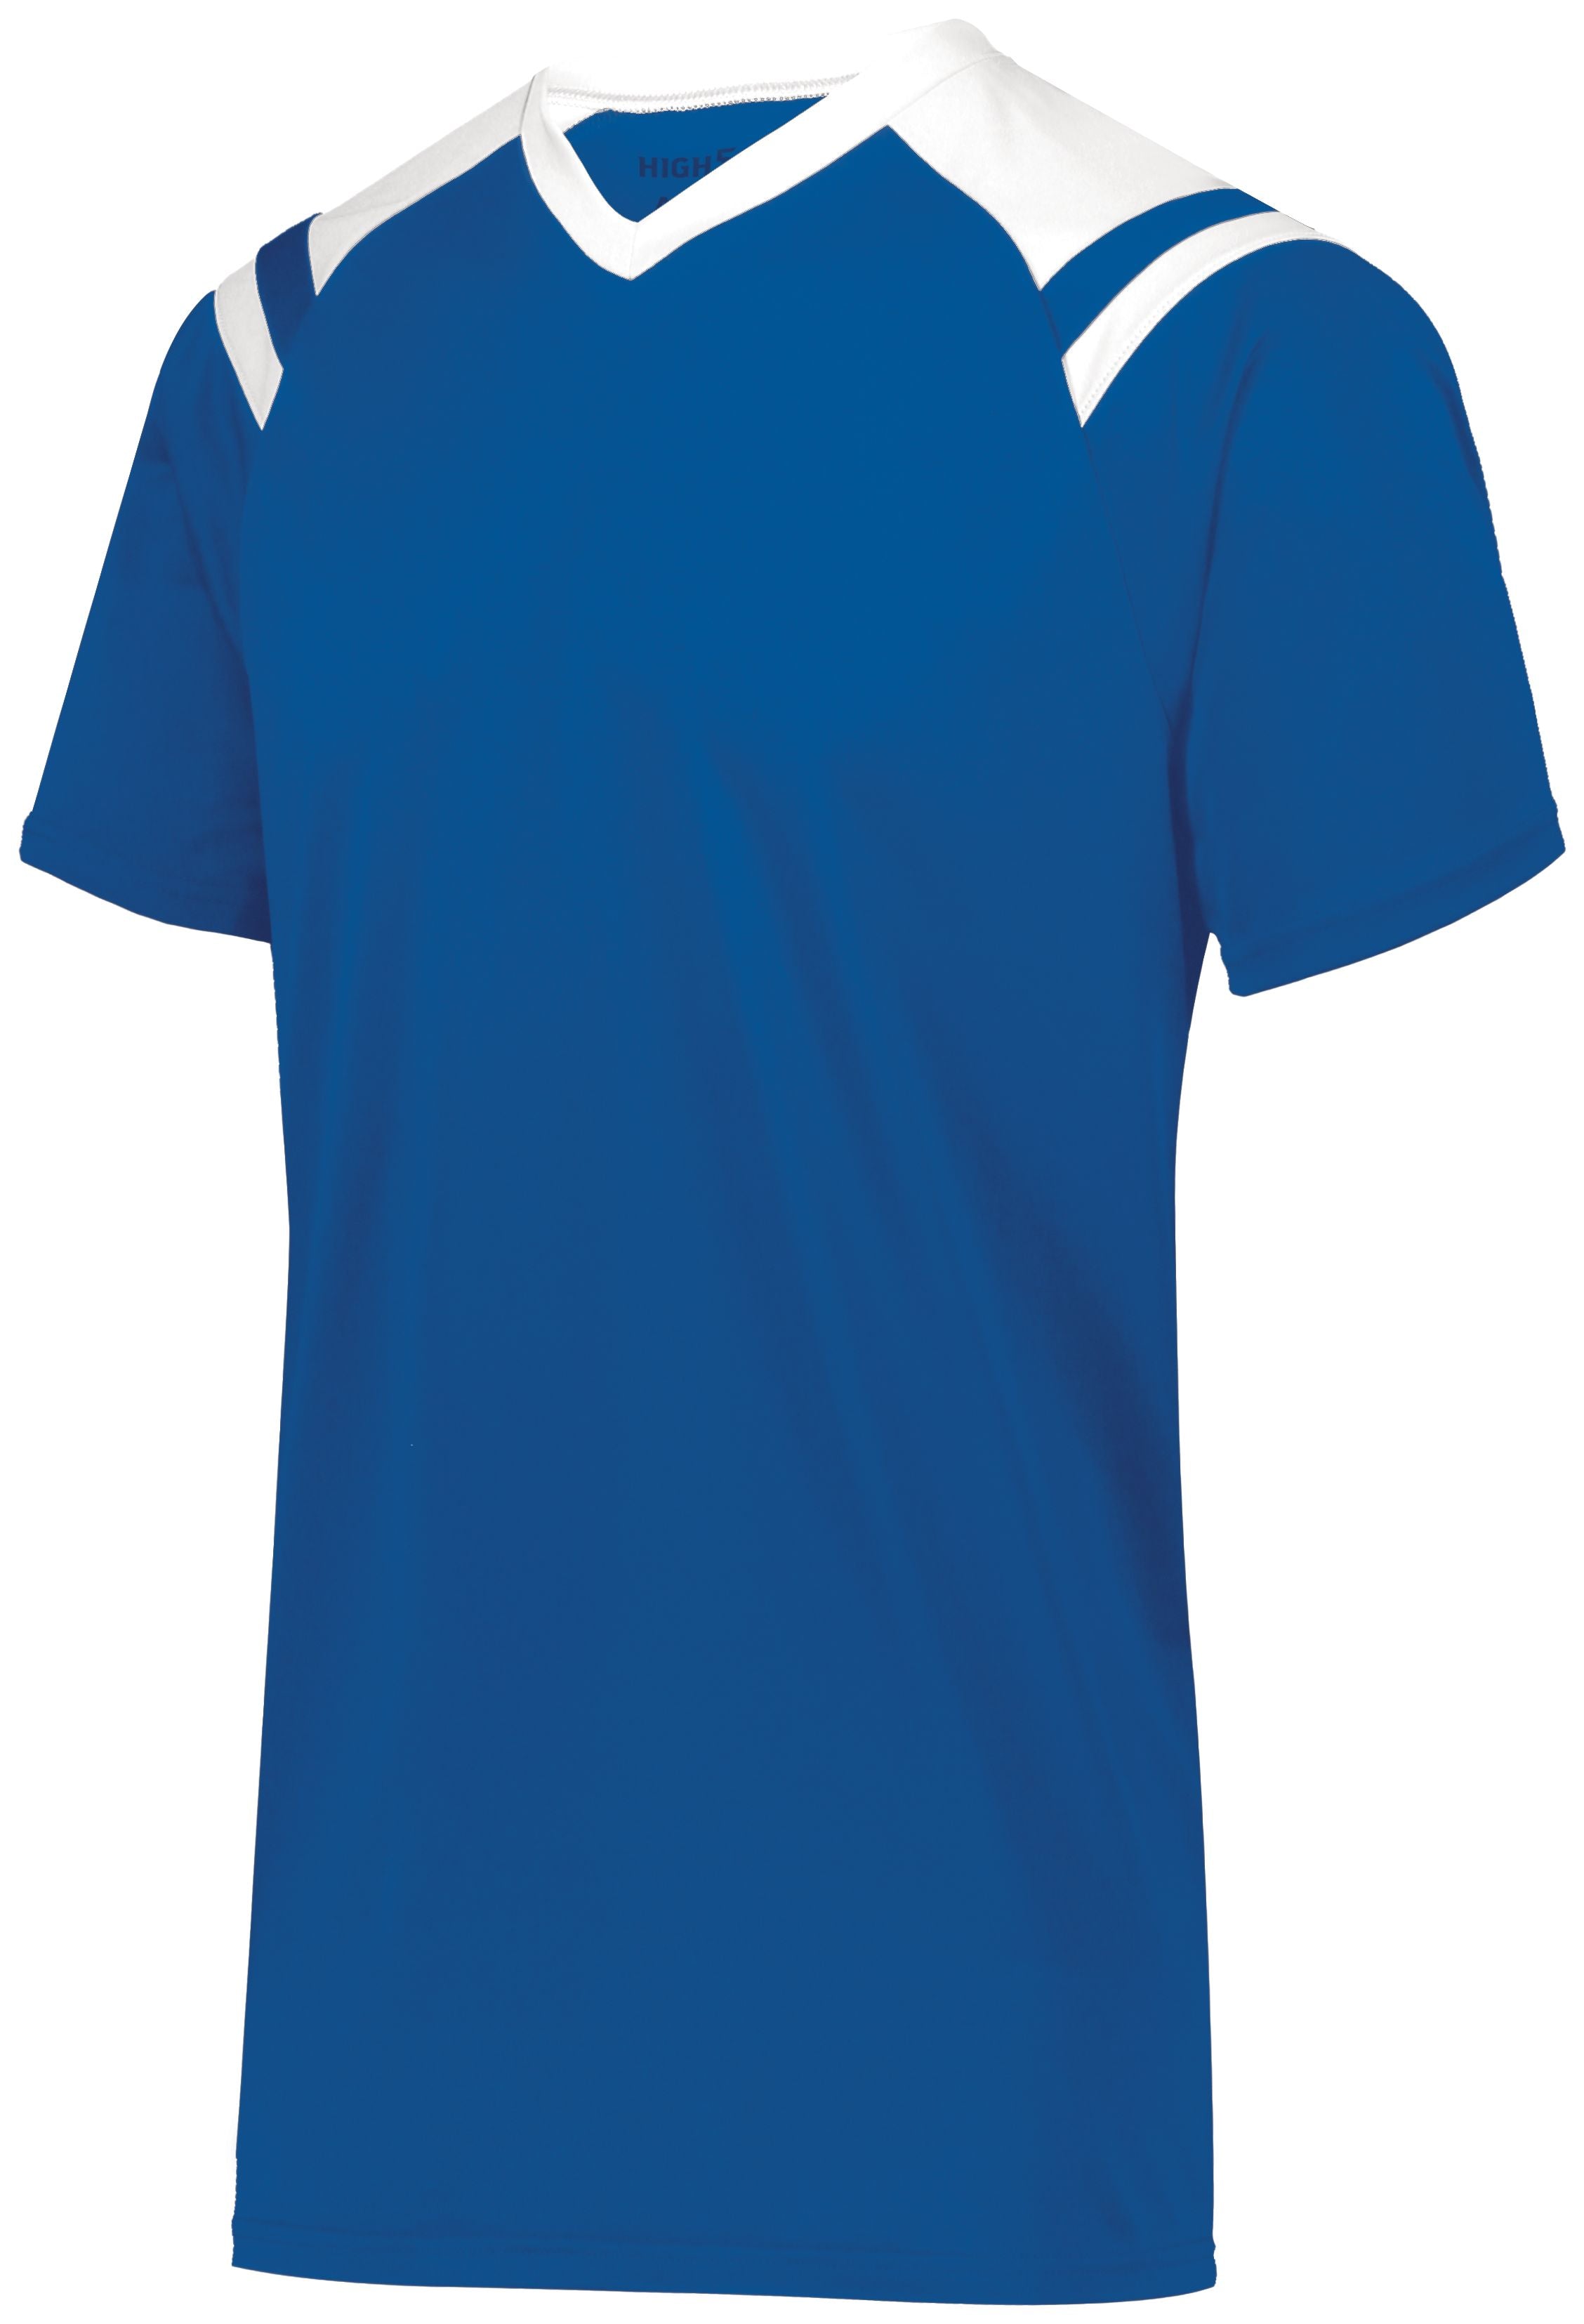 High 5 Sheffield Jersey in Royal/White  -Part of the Adult, Adult-Jersey, High5-Products, Soccer, Shirts, All-Sports-1, Sheffield-Soccer-Jerseys product lines at KanaleyCreations.com